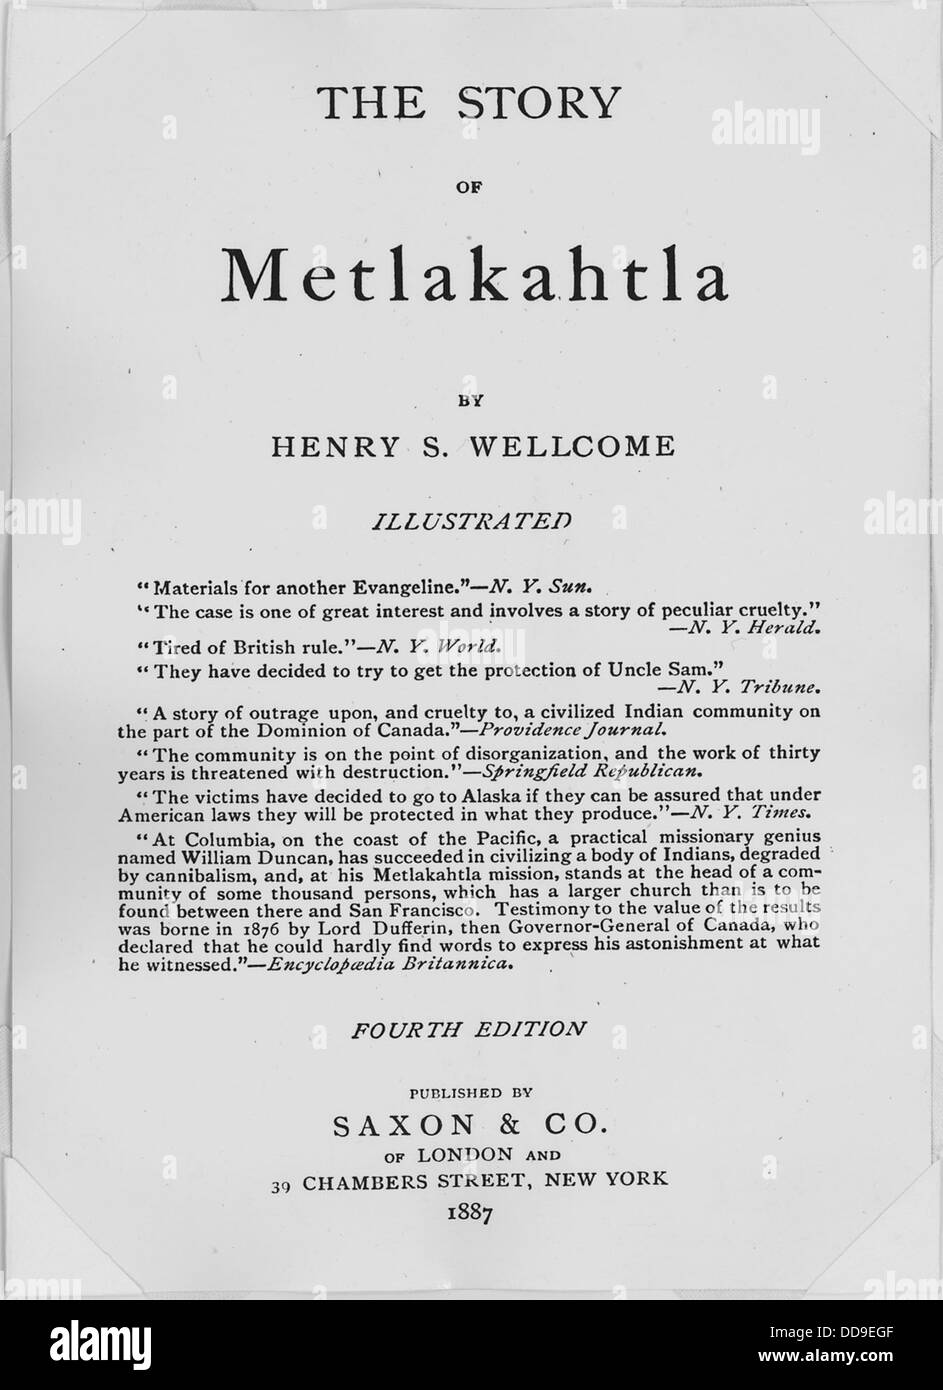 Henry S. Wellcome, The Story of Metlakahtla, 4th. edn., London and New York, 1887. Title page. - - 298061 Stock Photo